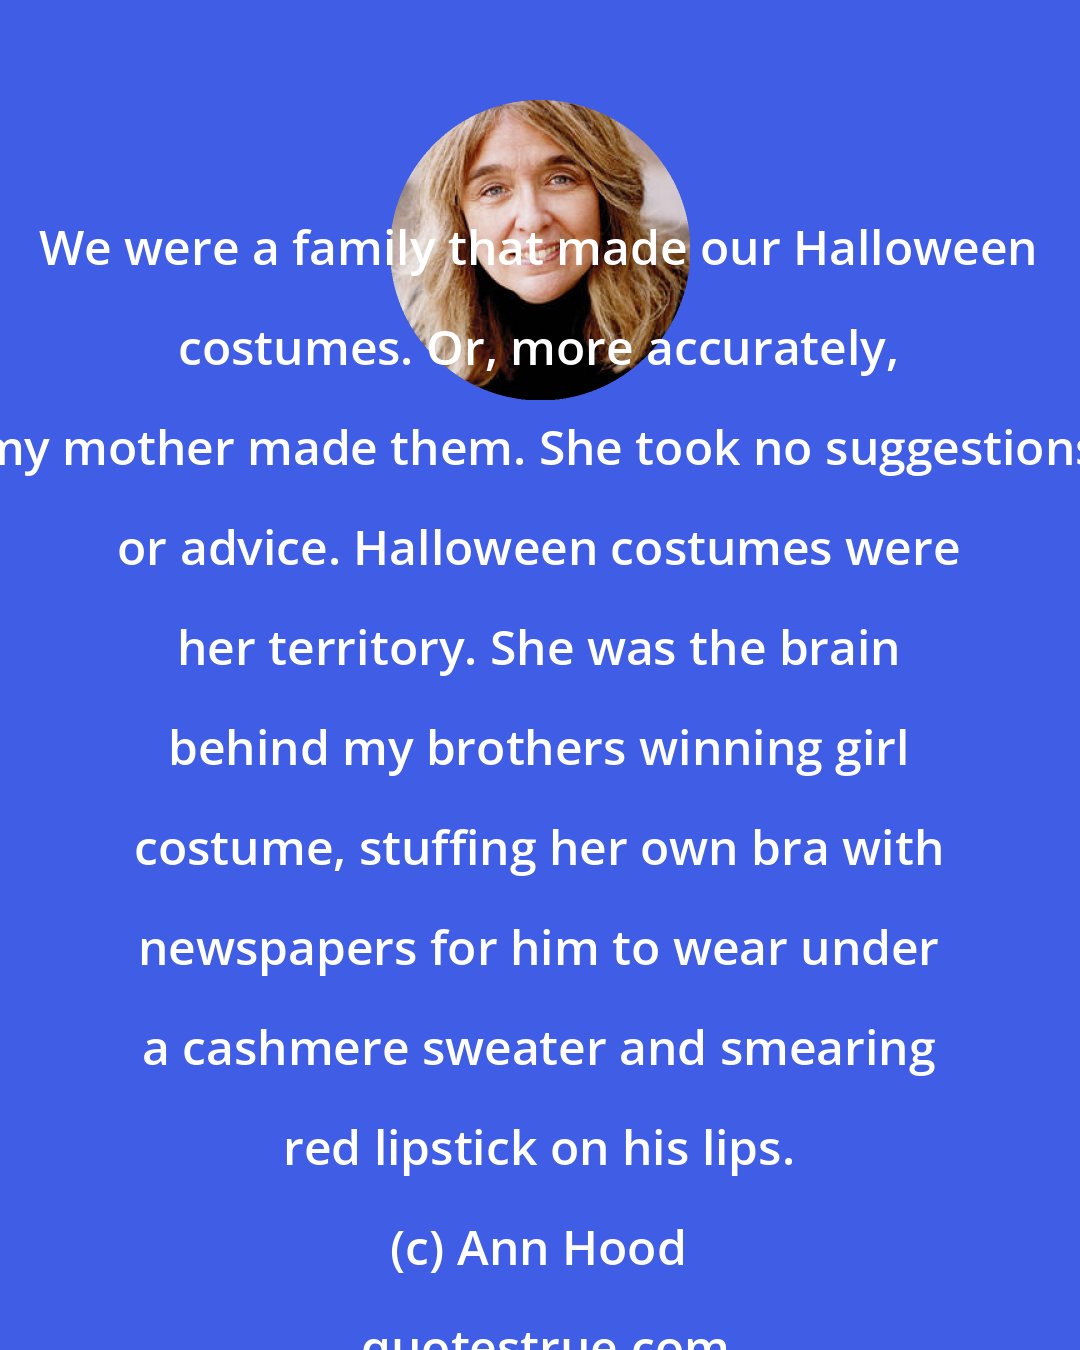 Ann Hood: We were a family that made our Halloween costumes. Or, more accurately, my mother made them. She took no suggestions or advice. Halloween costumes were her territory. She was the brain behind my brothers winning girl costume, stuffing her own bra with newspapers for him to wear under a cashmere sweater and smearing red lipstick on his lips.